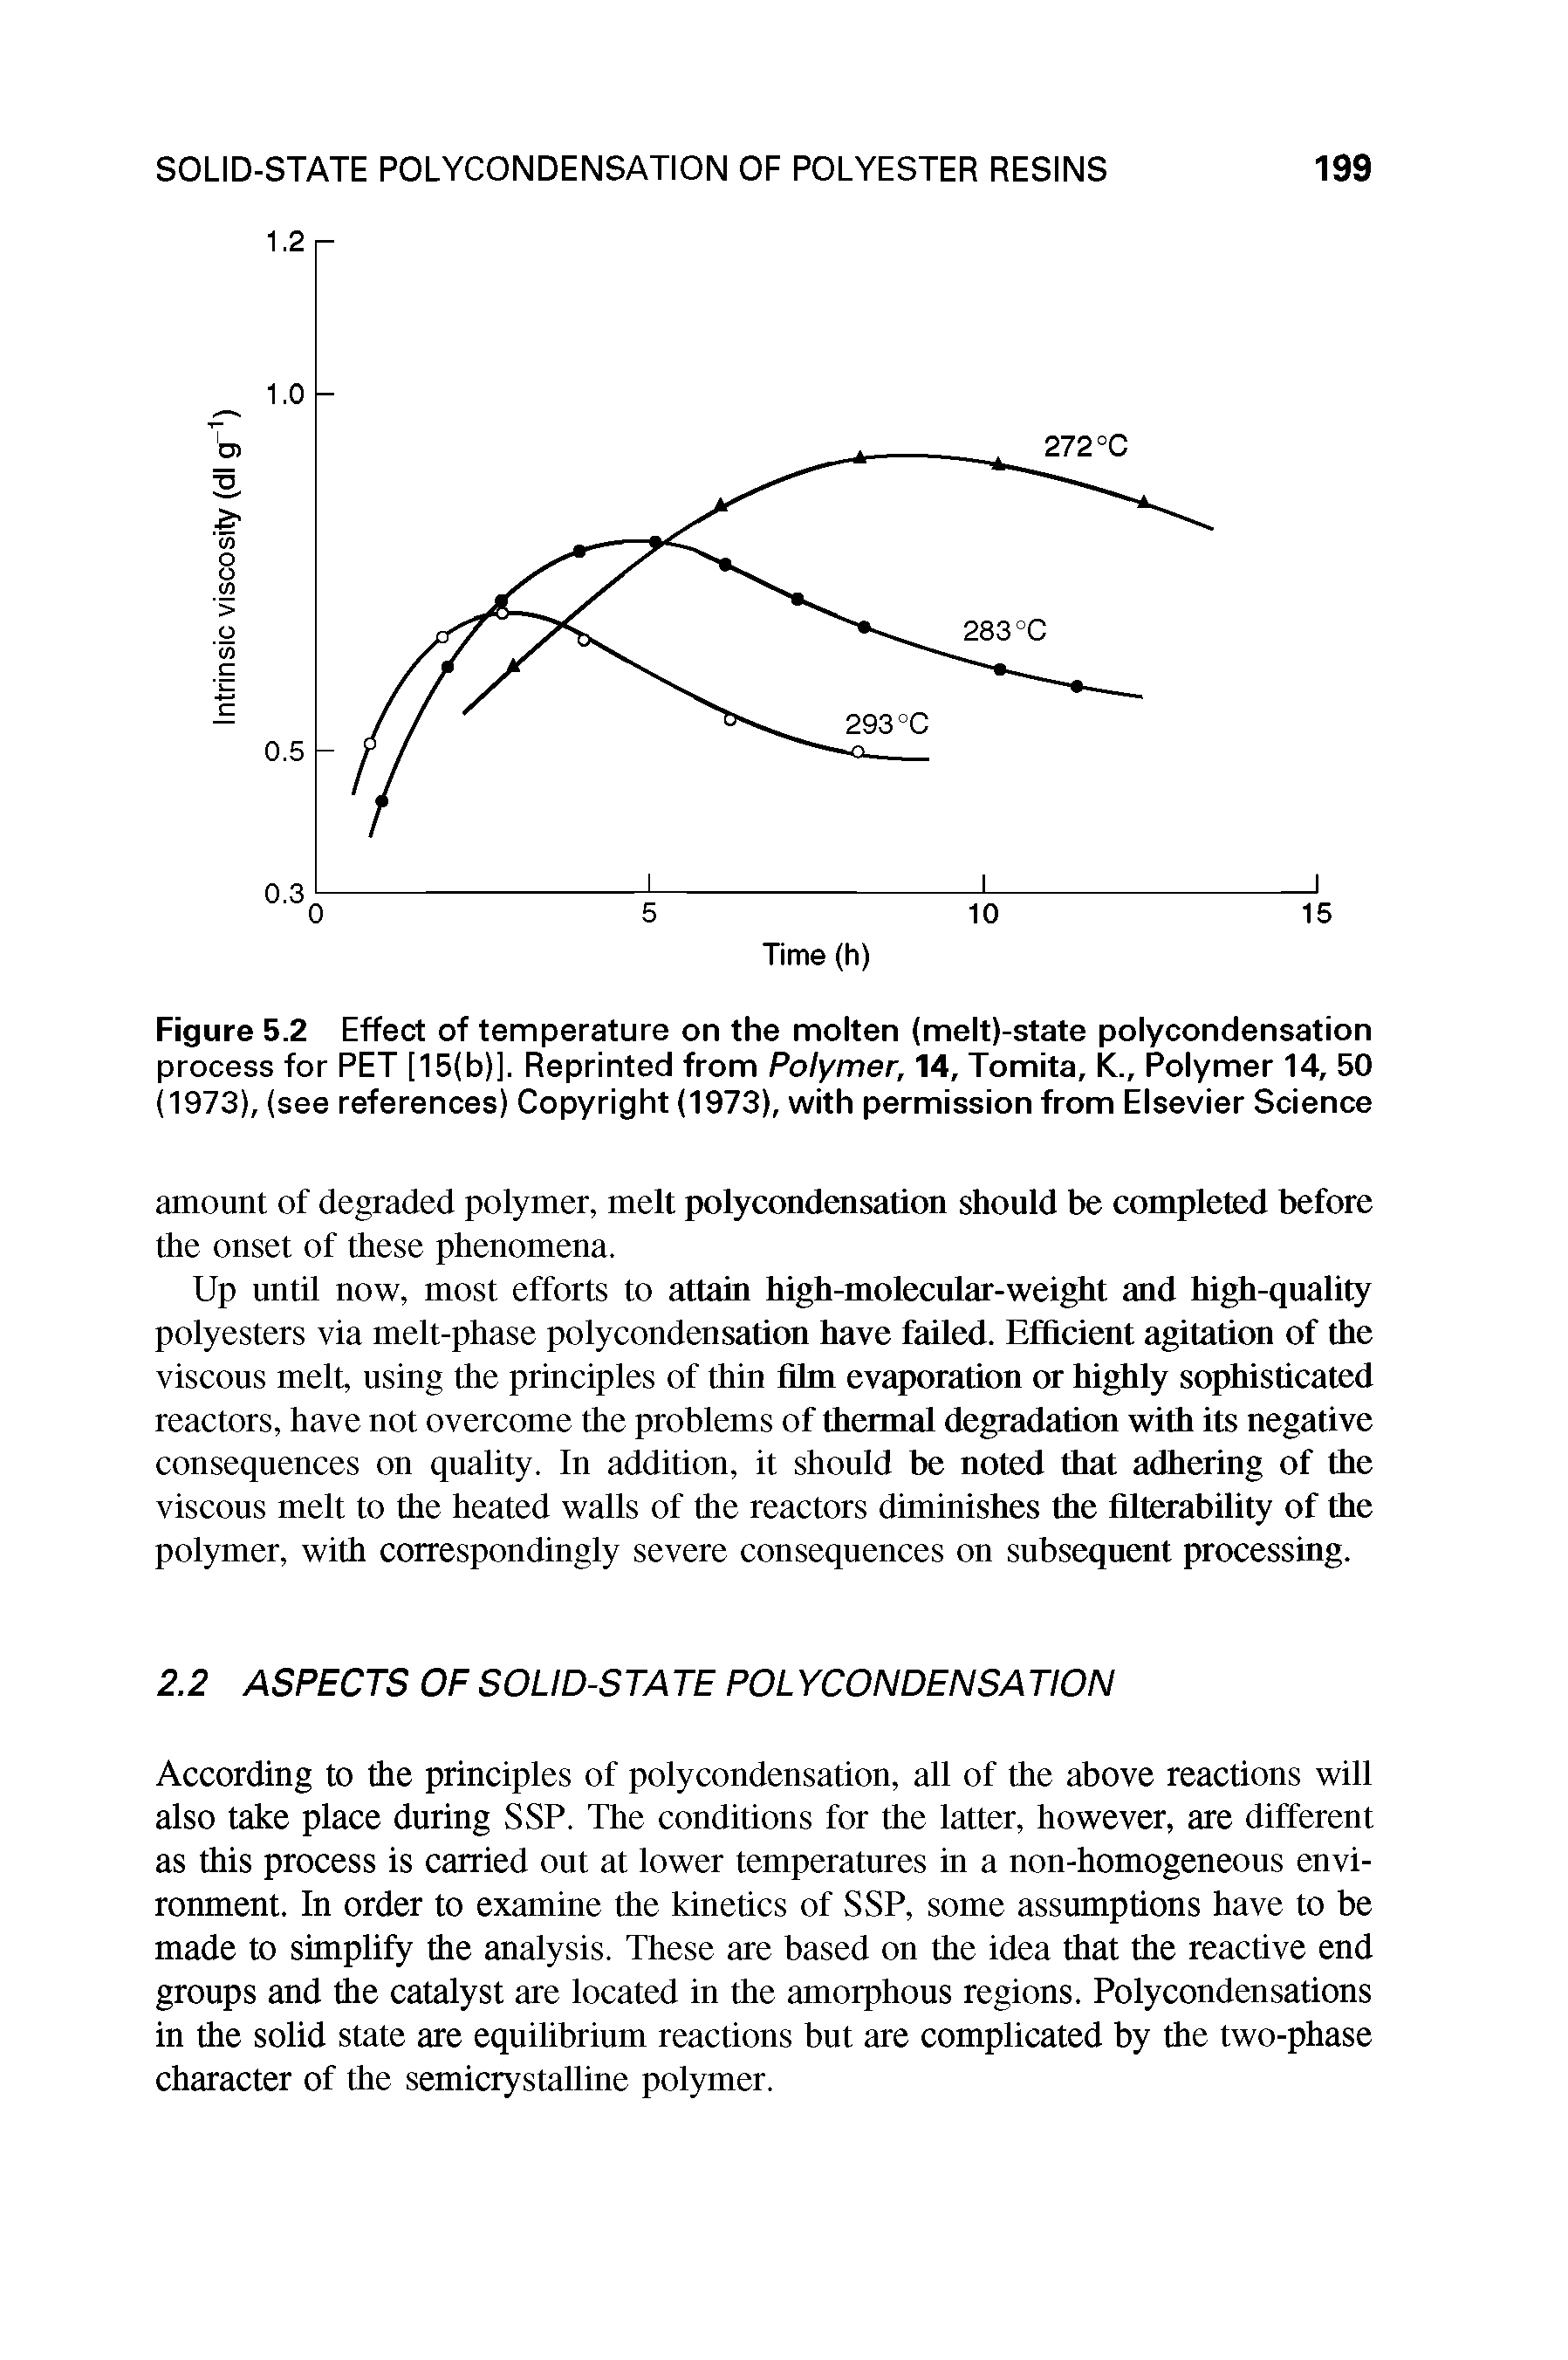 Figure 5.2 Effect of temperature on the molten (melt)-state polycondensation process for PET [15(b)], Reprinted from Polymer, 14, Tomita, K., Polymer 14, 50 (1973), (see references) Copyright (1973), with permission from Elsevier Science...